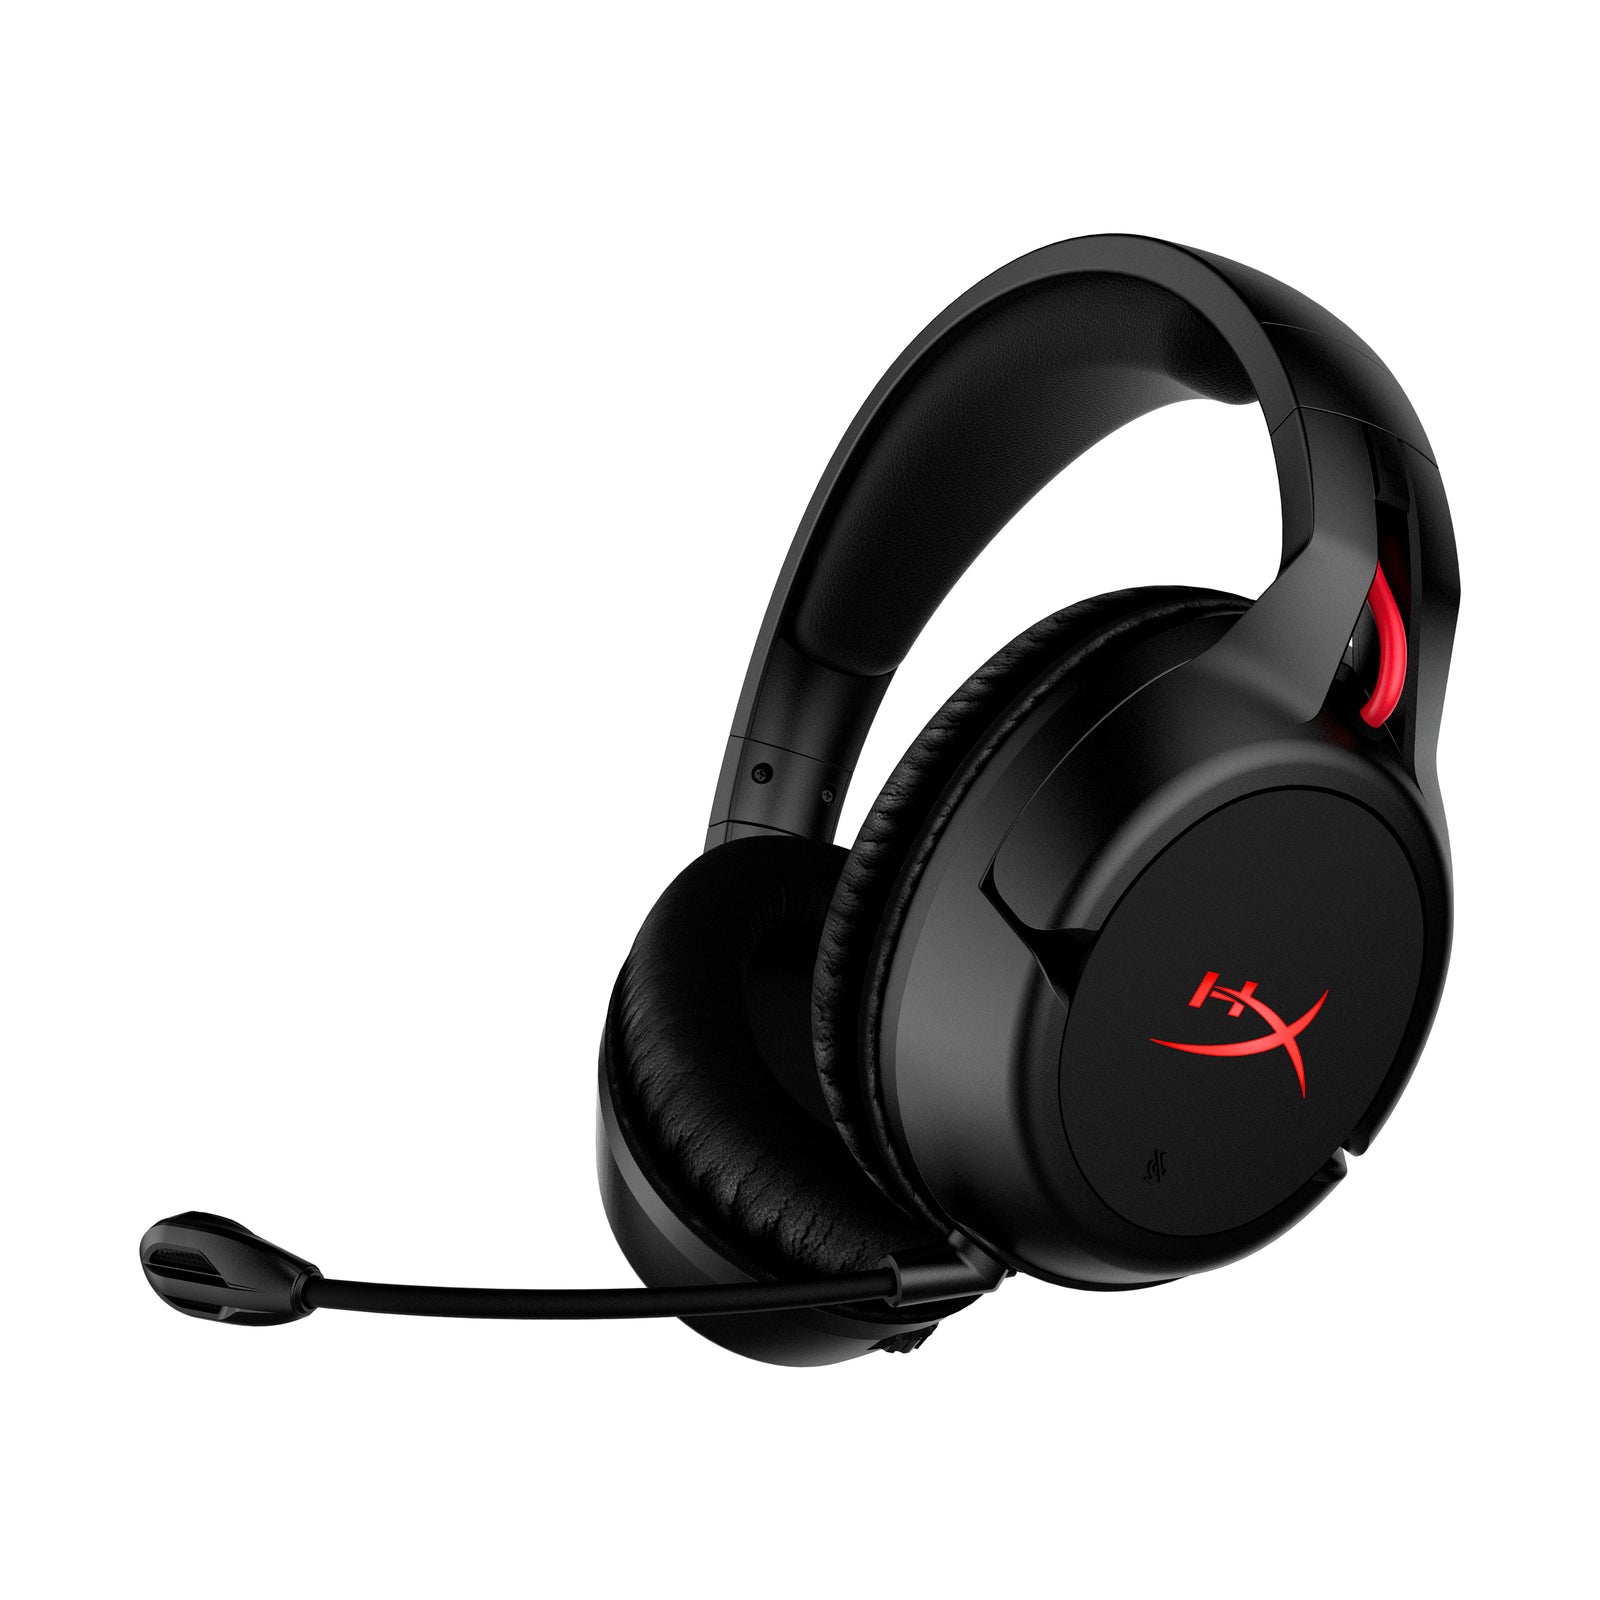 Cloud Flight – Wireless USB Headset for PC and PS4™ HyperX